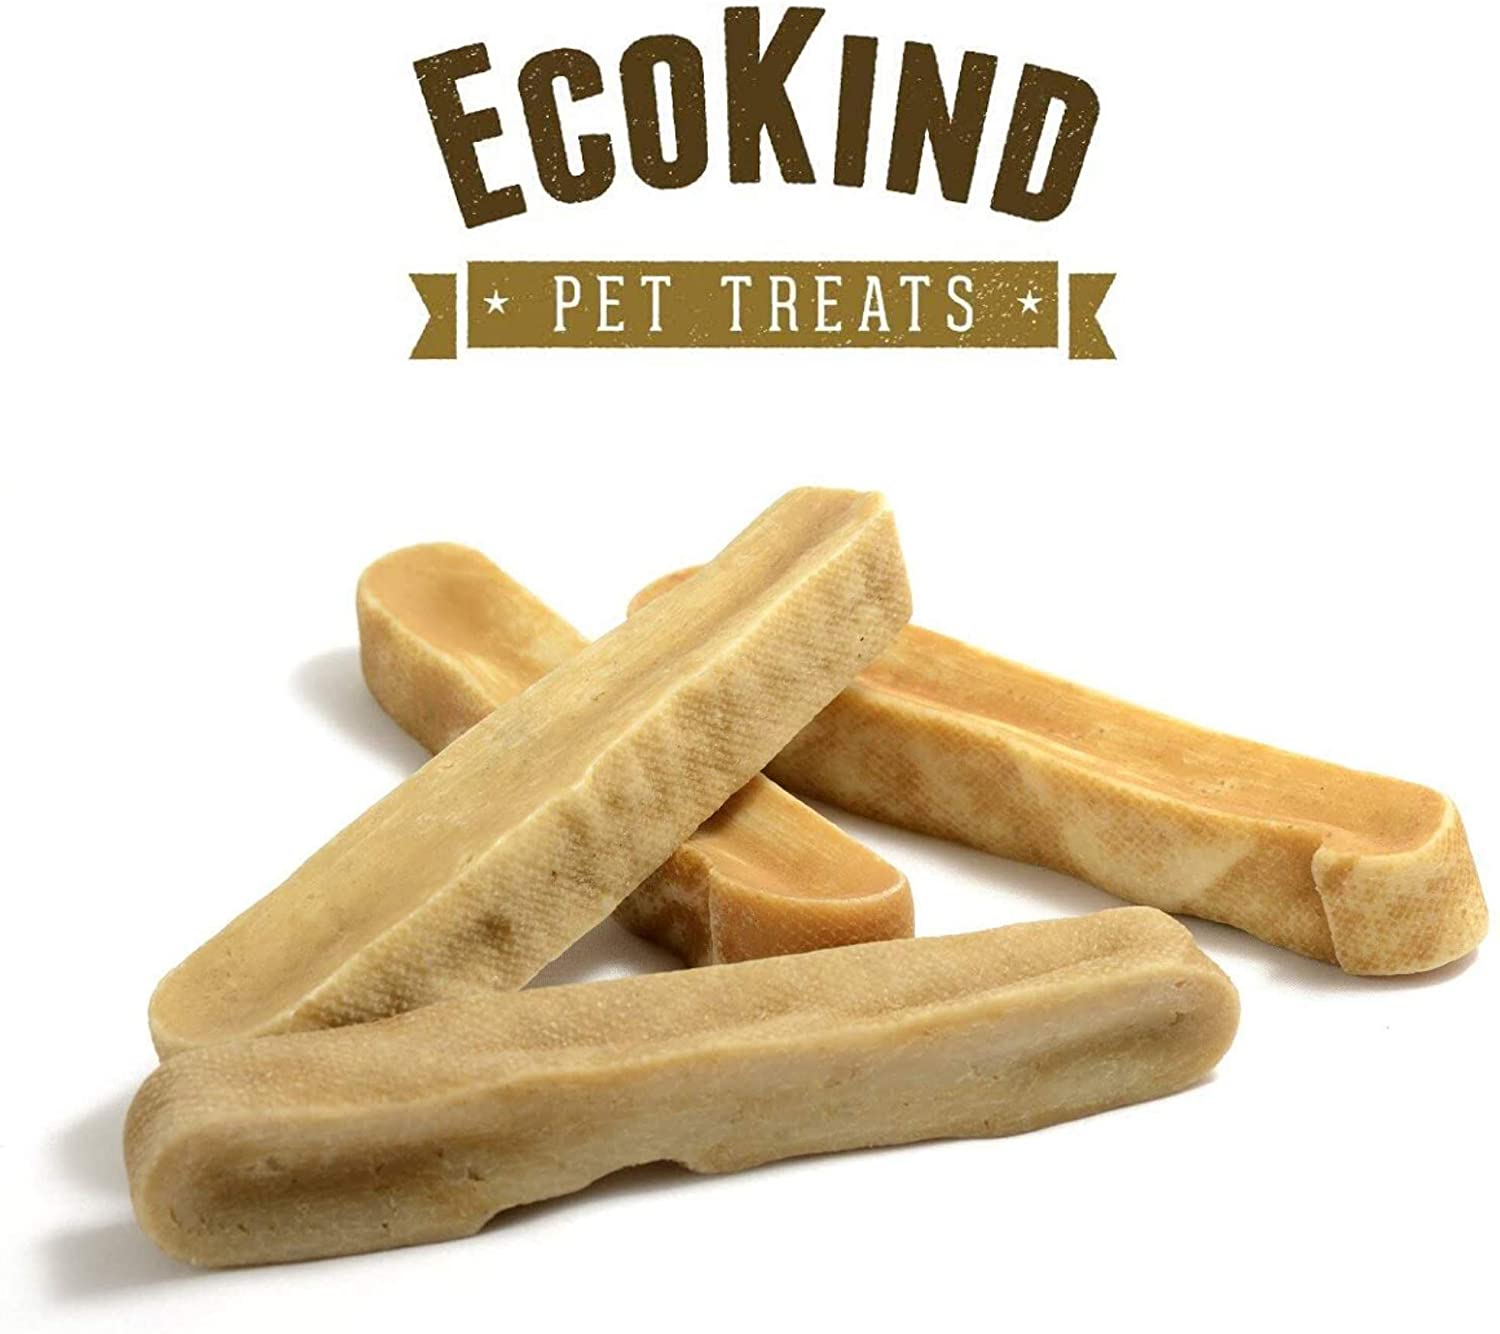 EcoKind logo and four Large Sticks - EcoKind Himalayan Yak Chew Treats - Long Lasting, Grain-Free Chews for Dogs and Puppies